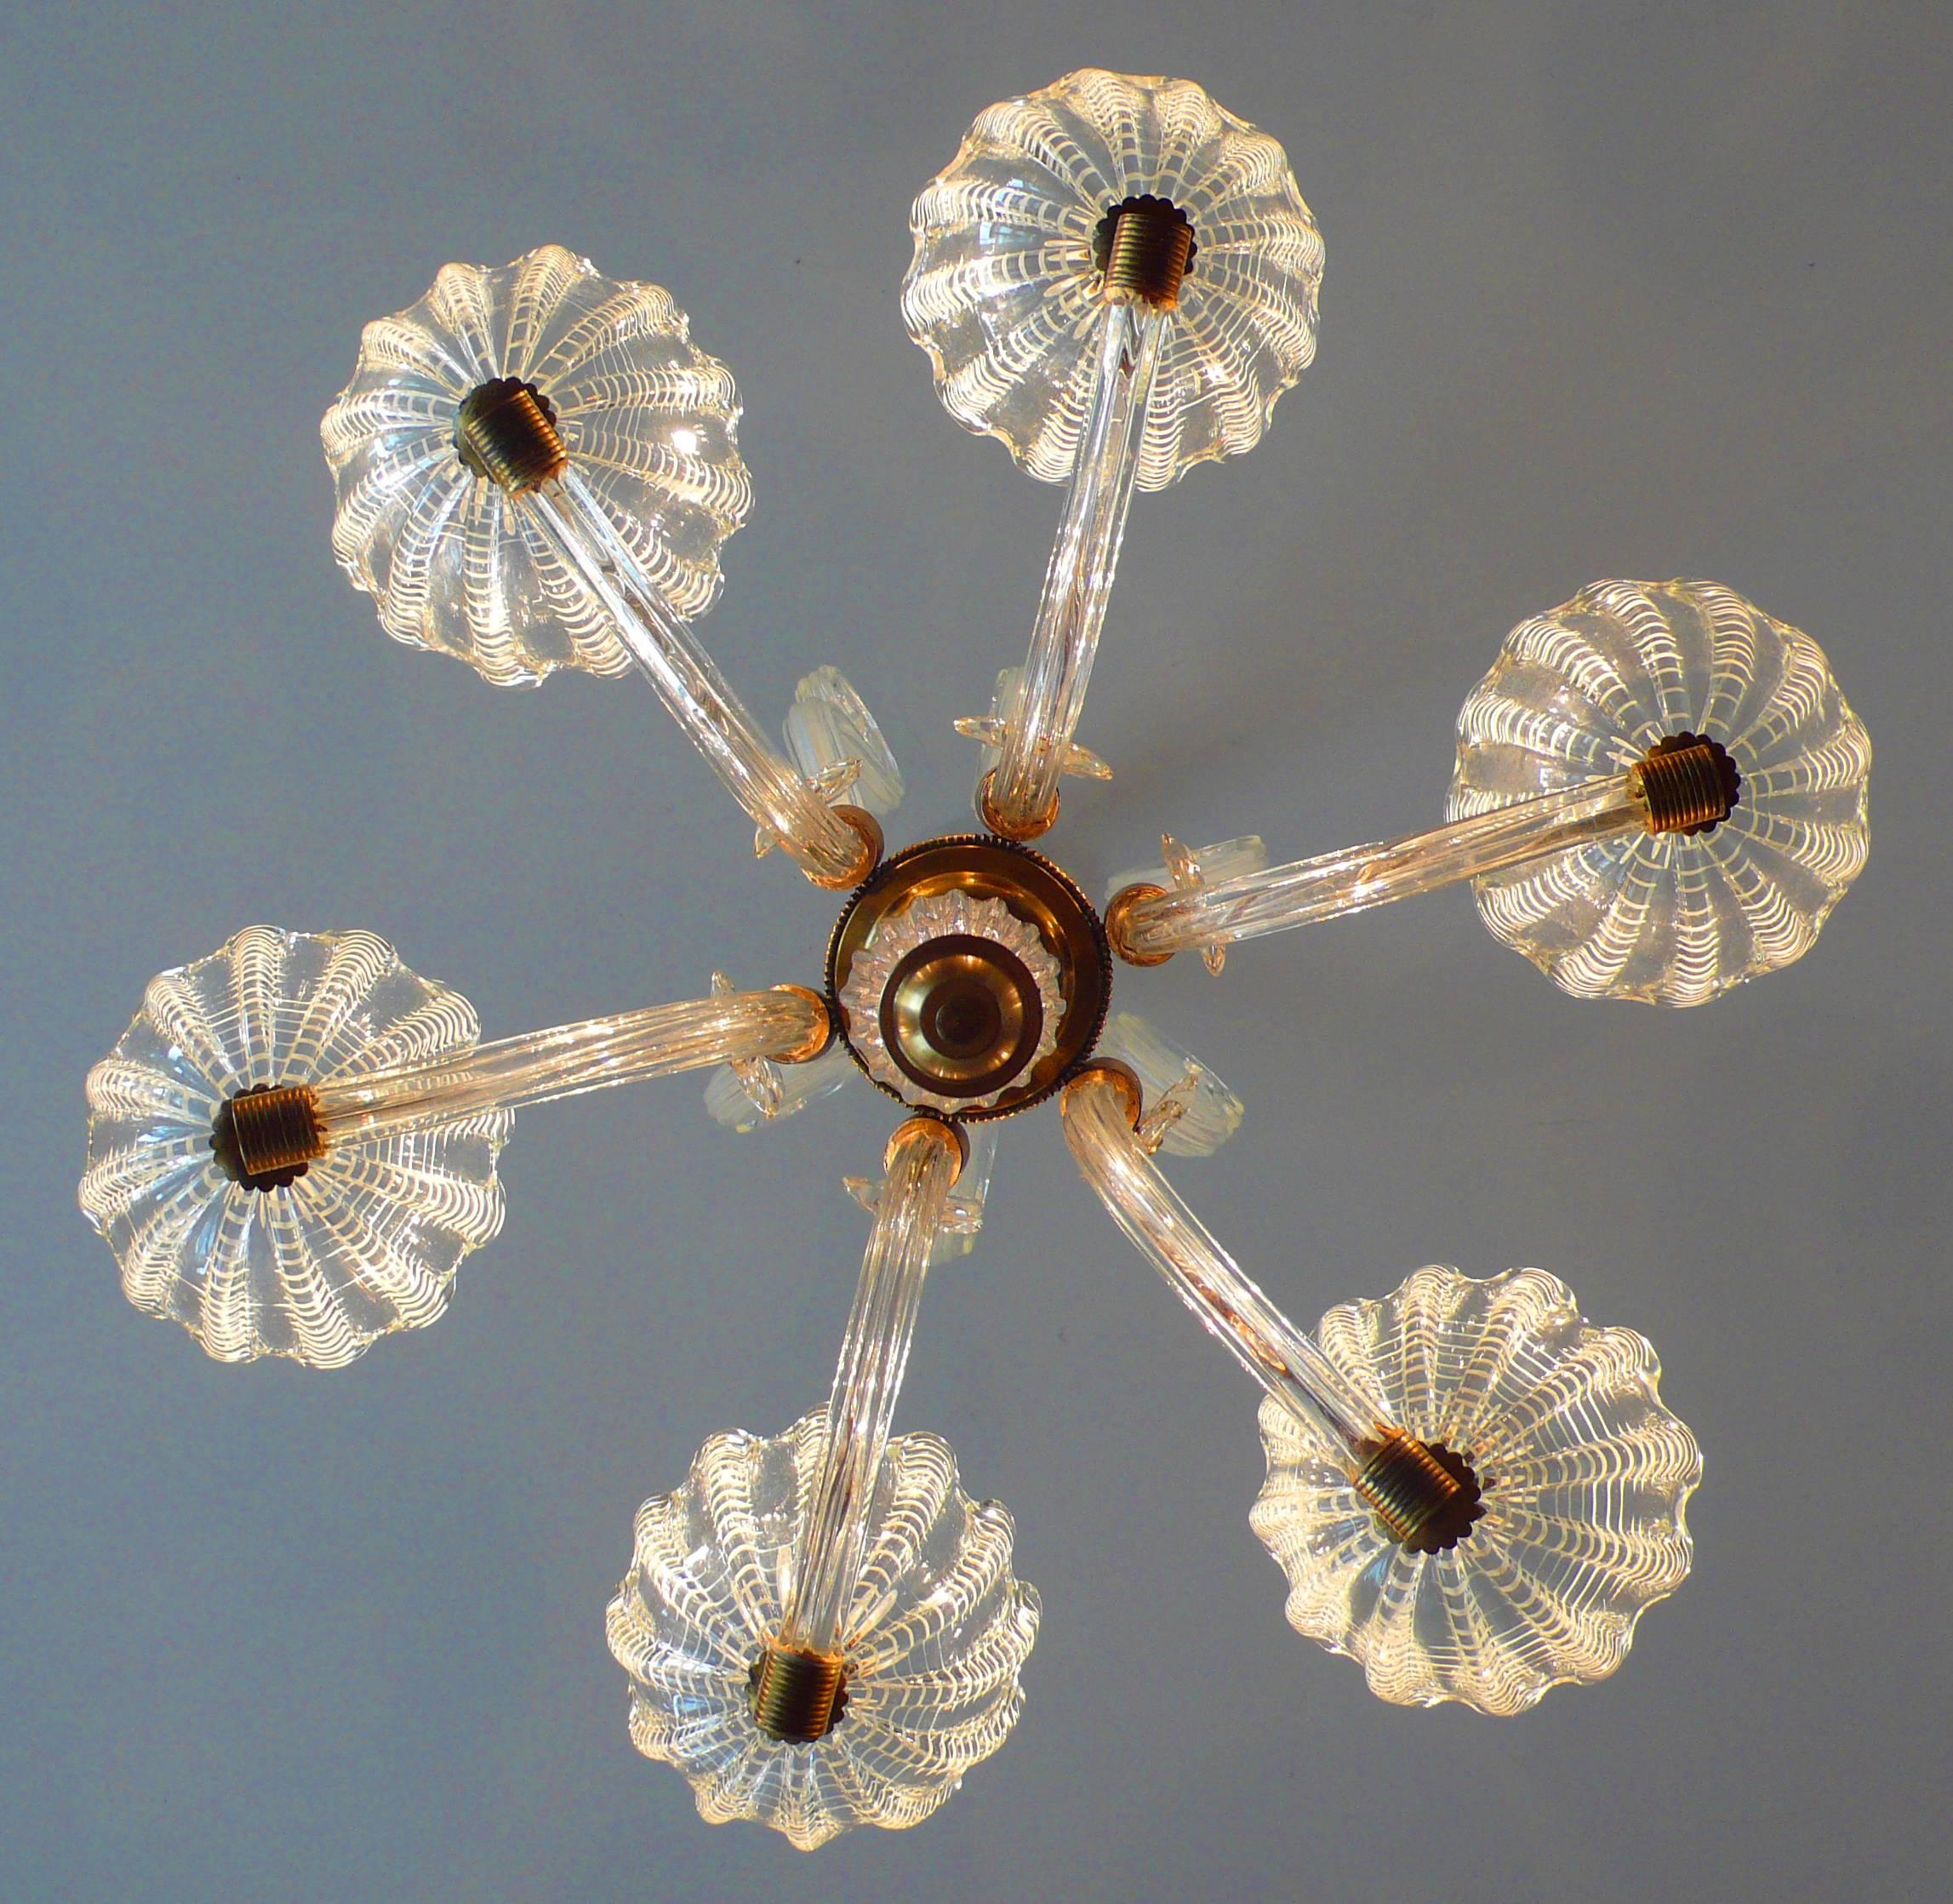 Brass Royal Chandelier by Barovier & Toso, Murano, 1940s